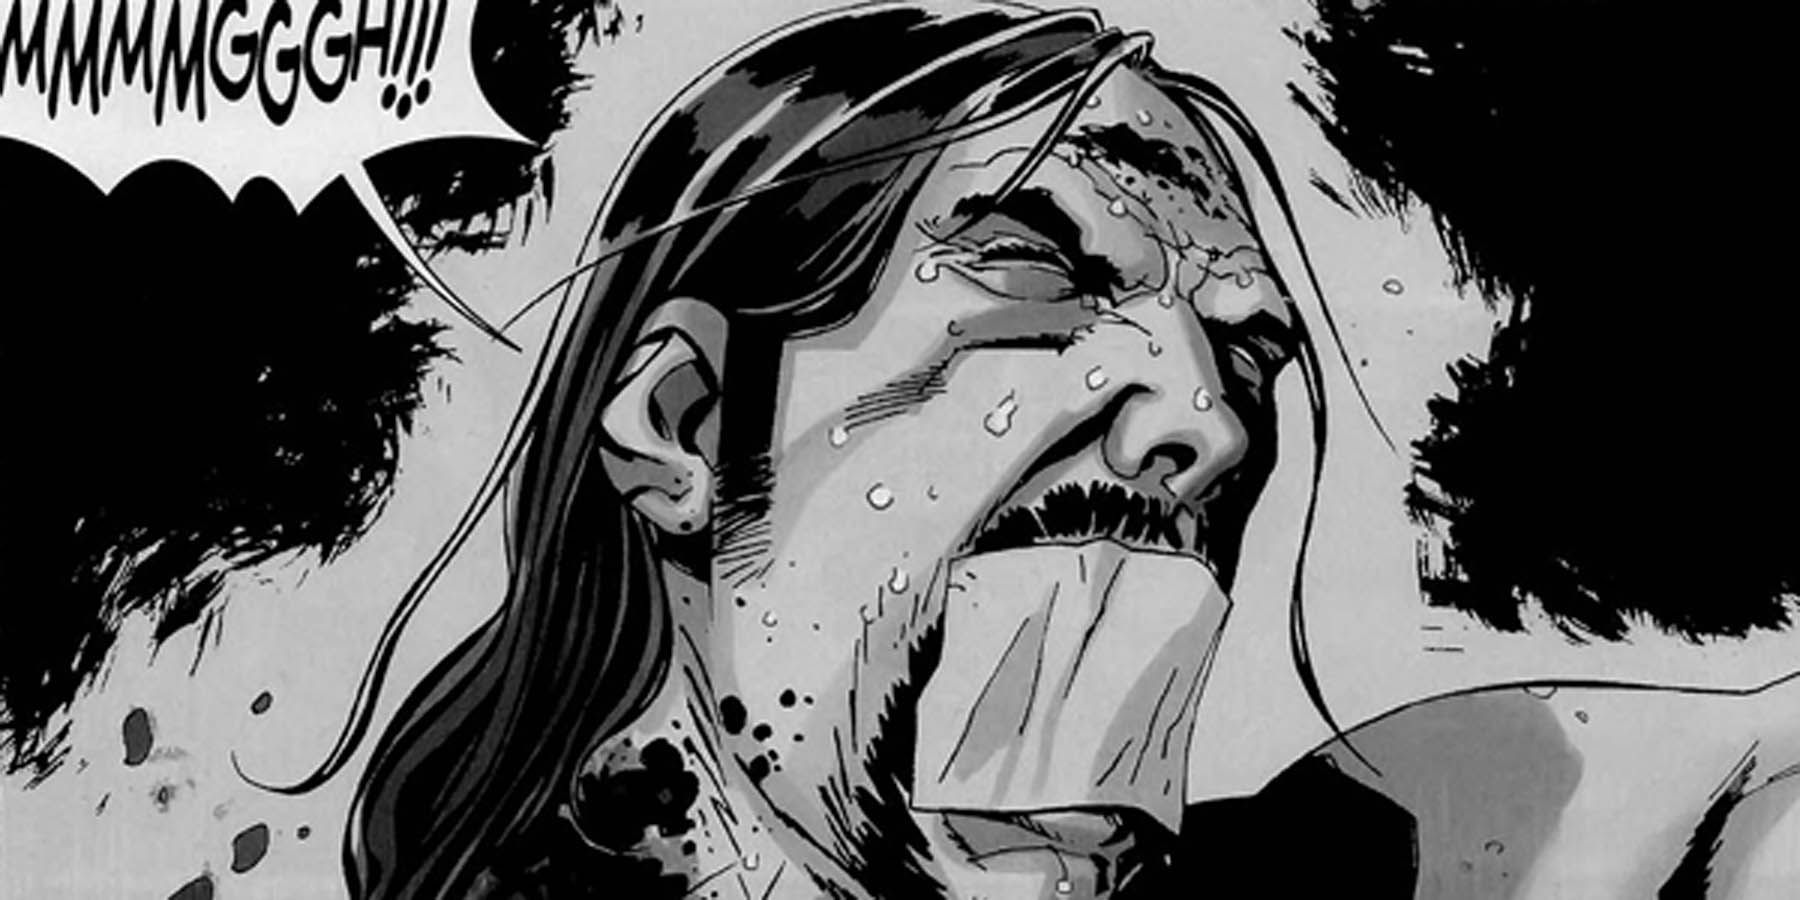 Michonne torturing the Governor in The Walking Dead comic